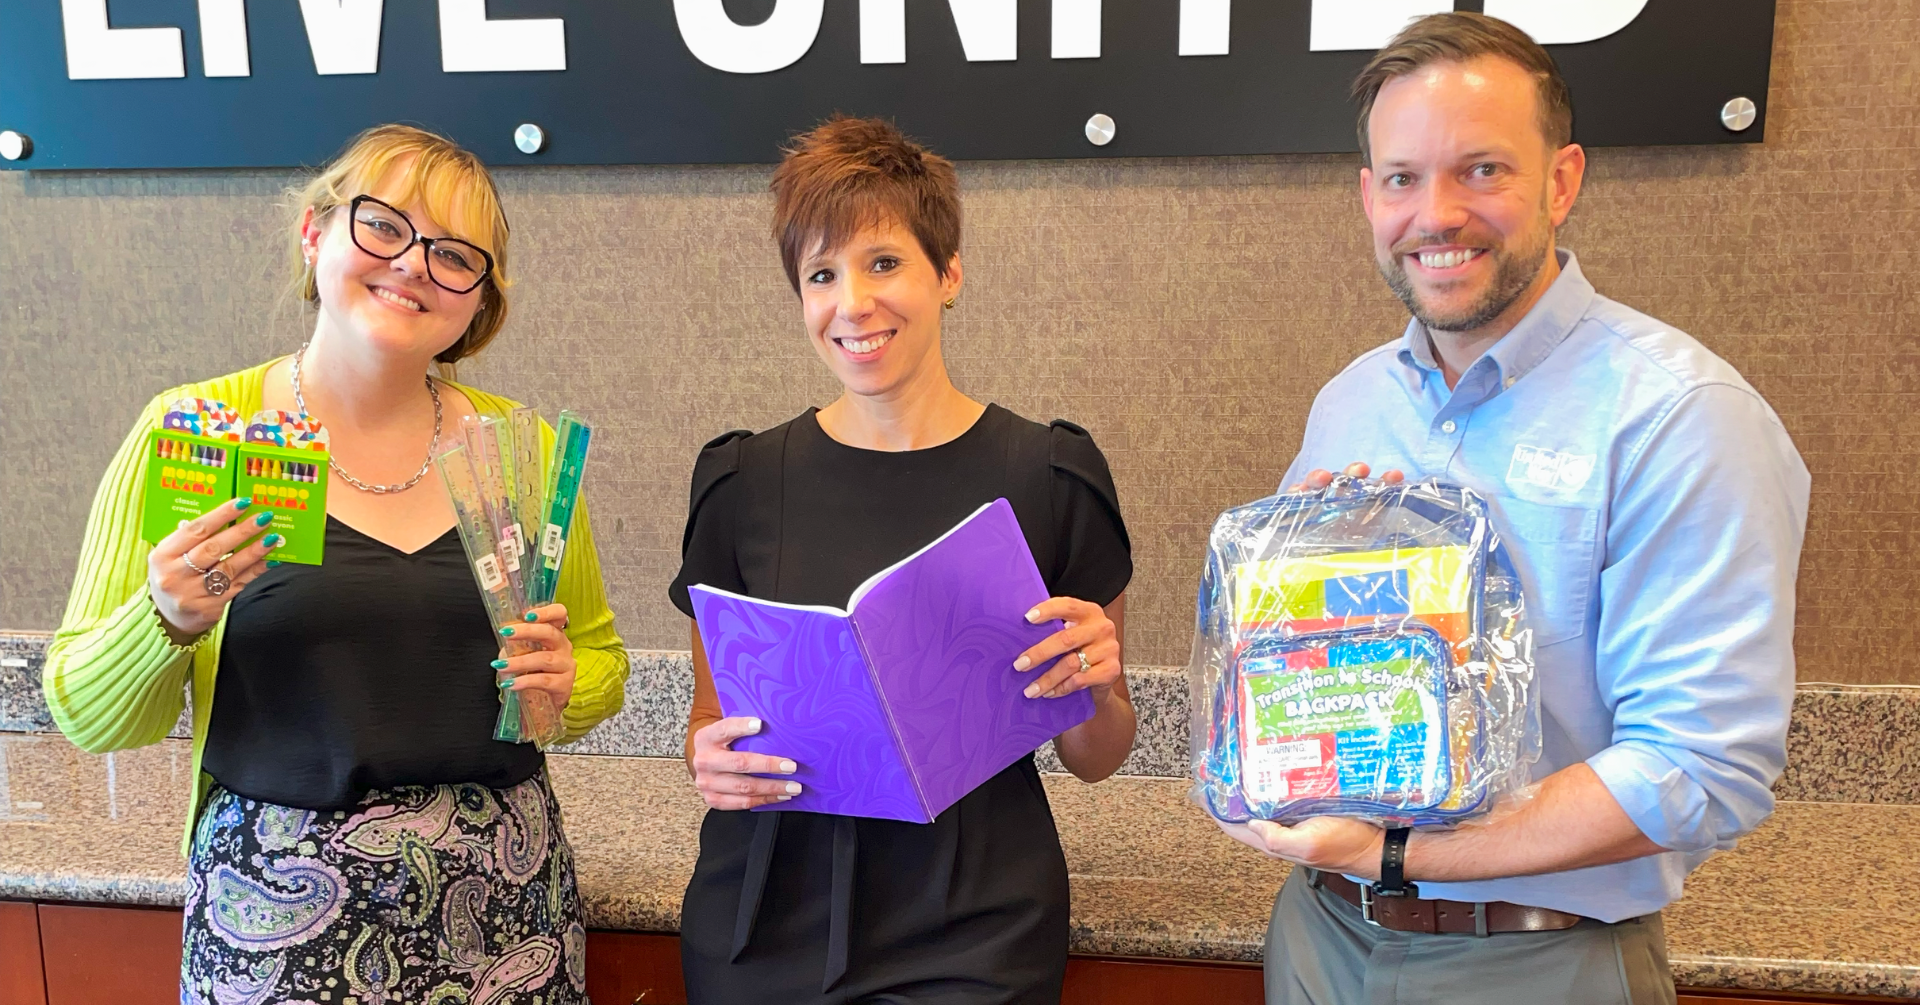 Aurbie (left) Karen (middle) and Aaron (right) are smiling and posing with school supplies